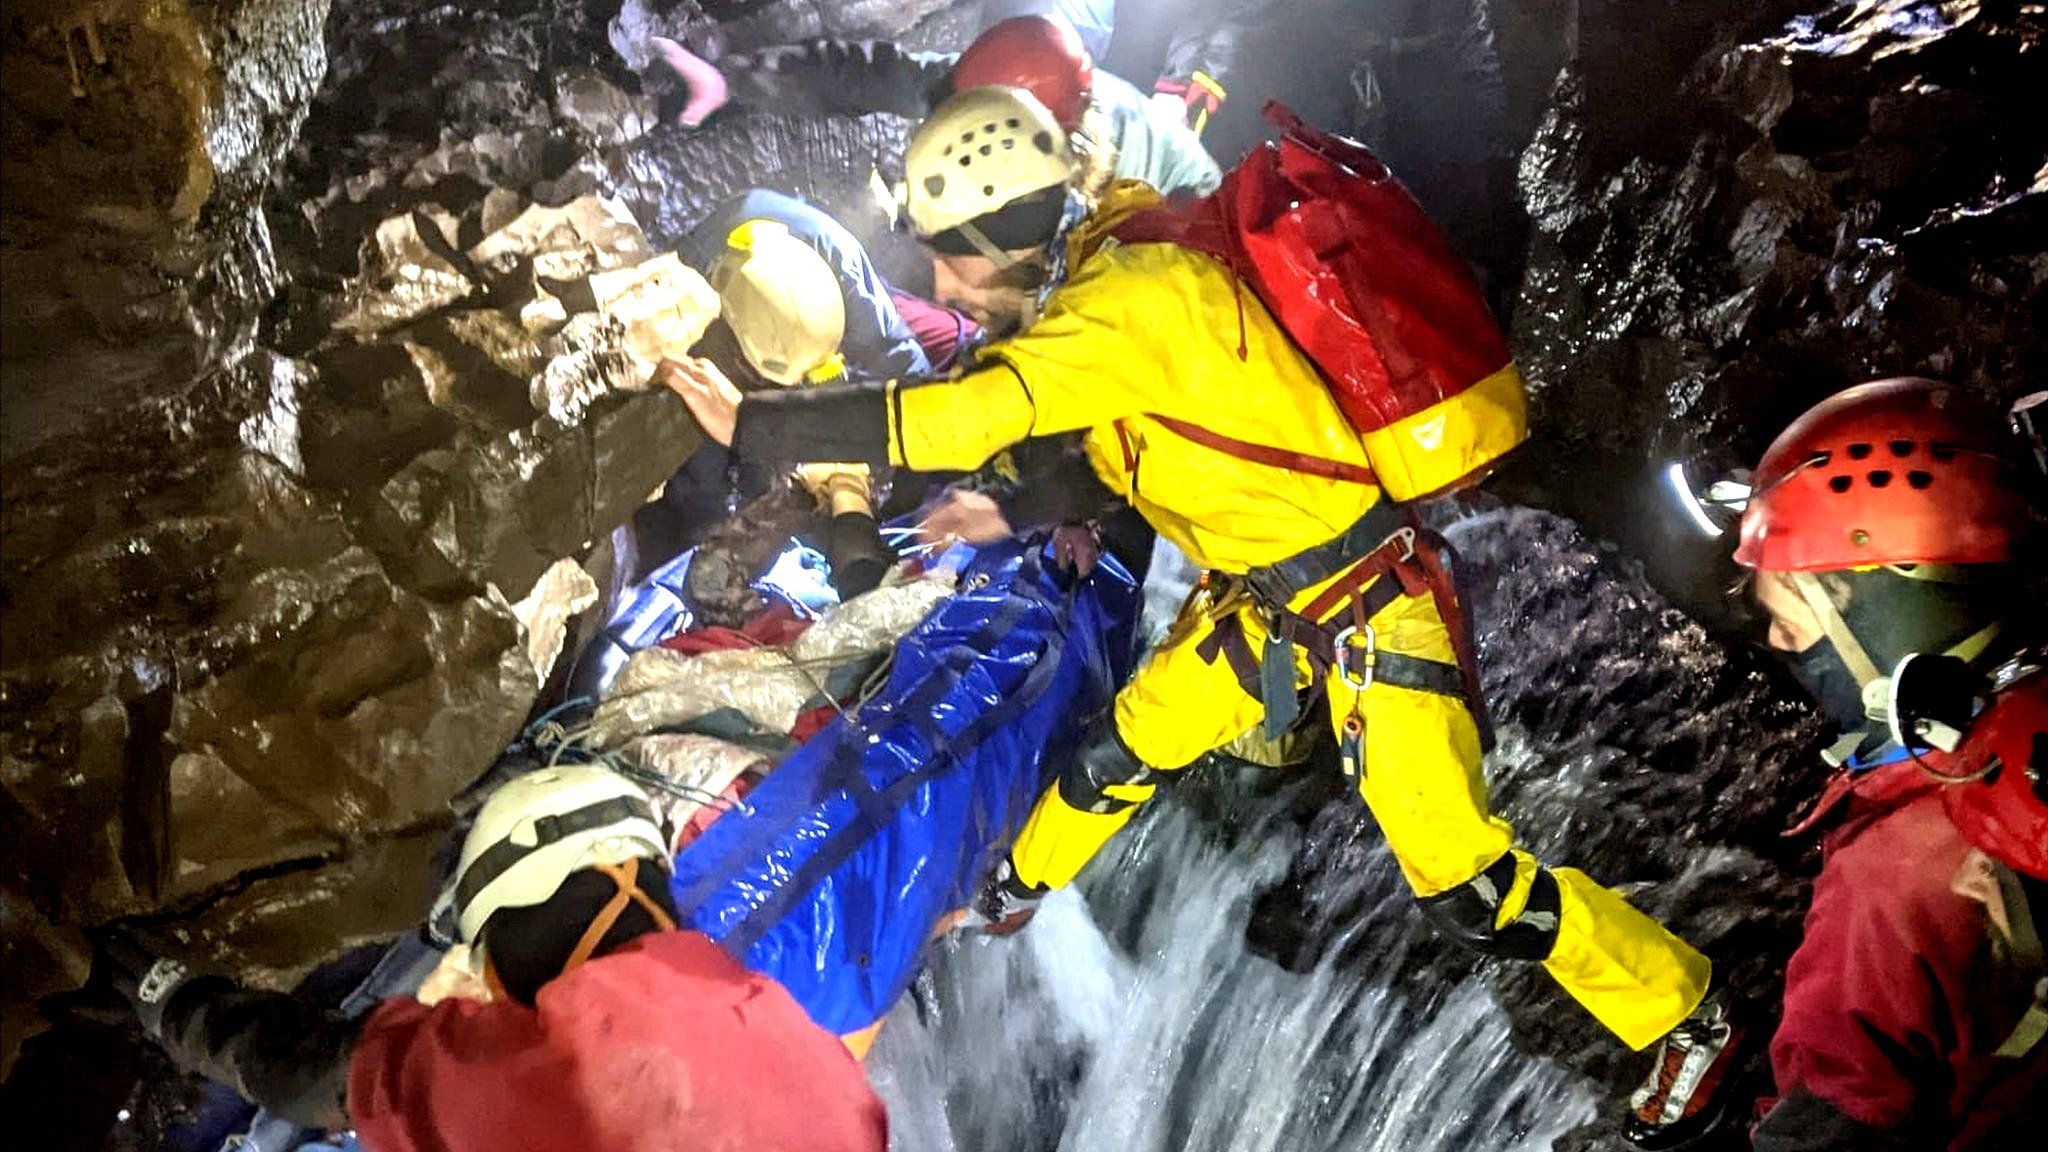 Pictures from inside the cave during the rescue